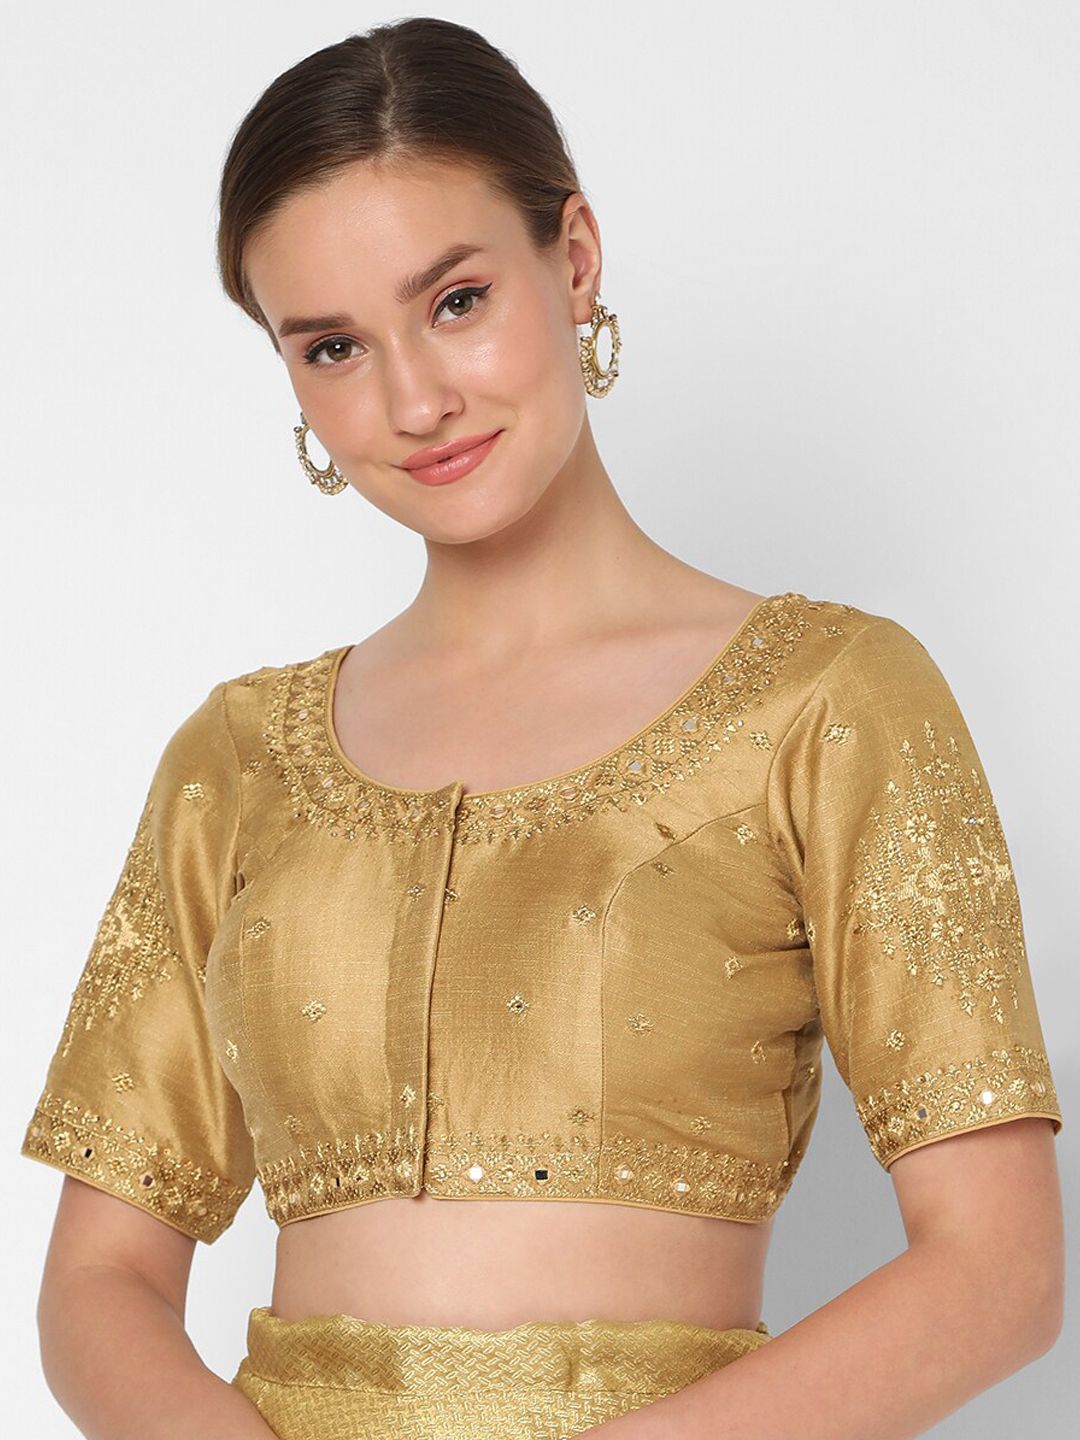 SALWAR STUDIO Gold-Coloured Embroidered Readymade Saree Blouse Price in India